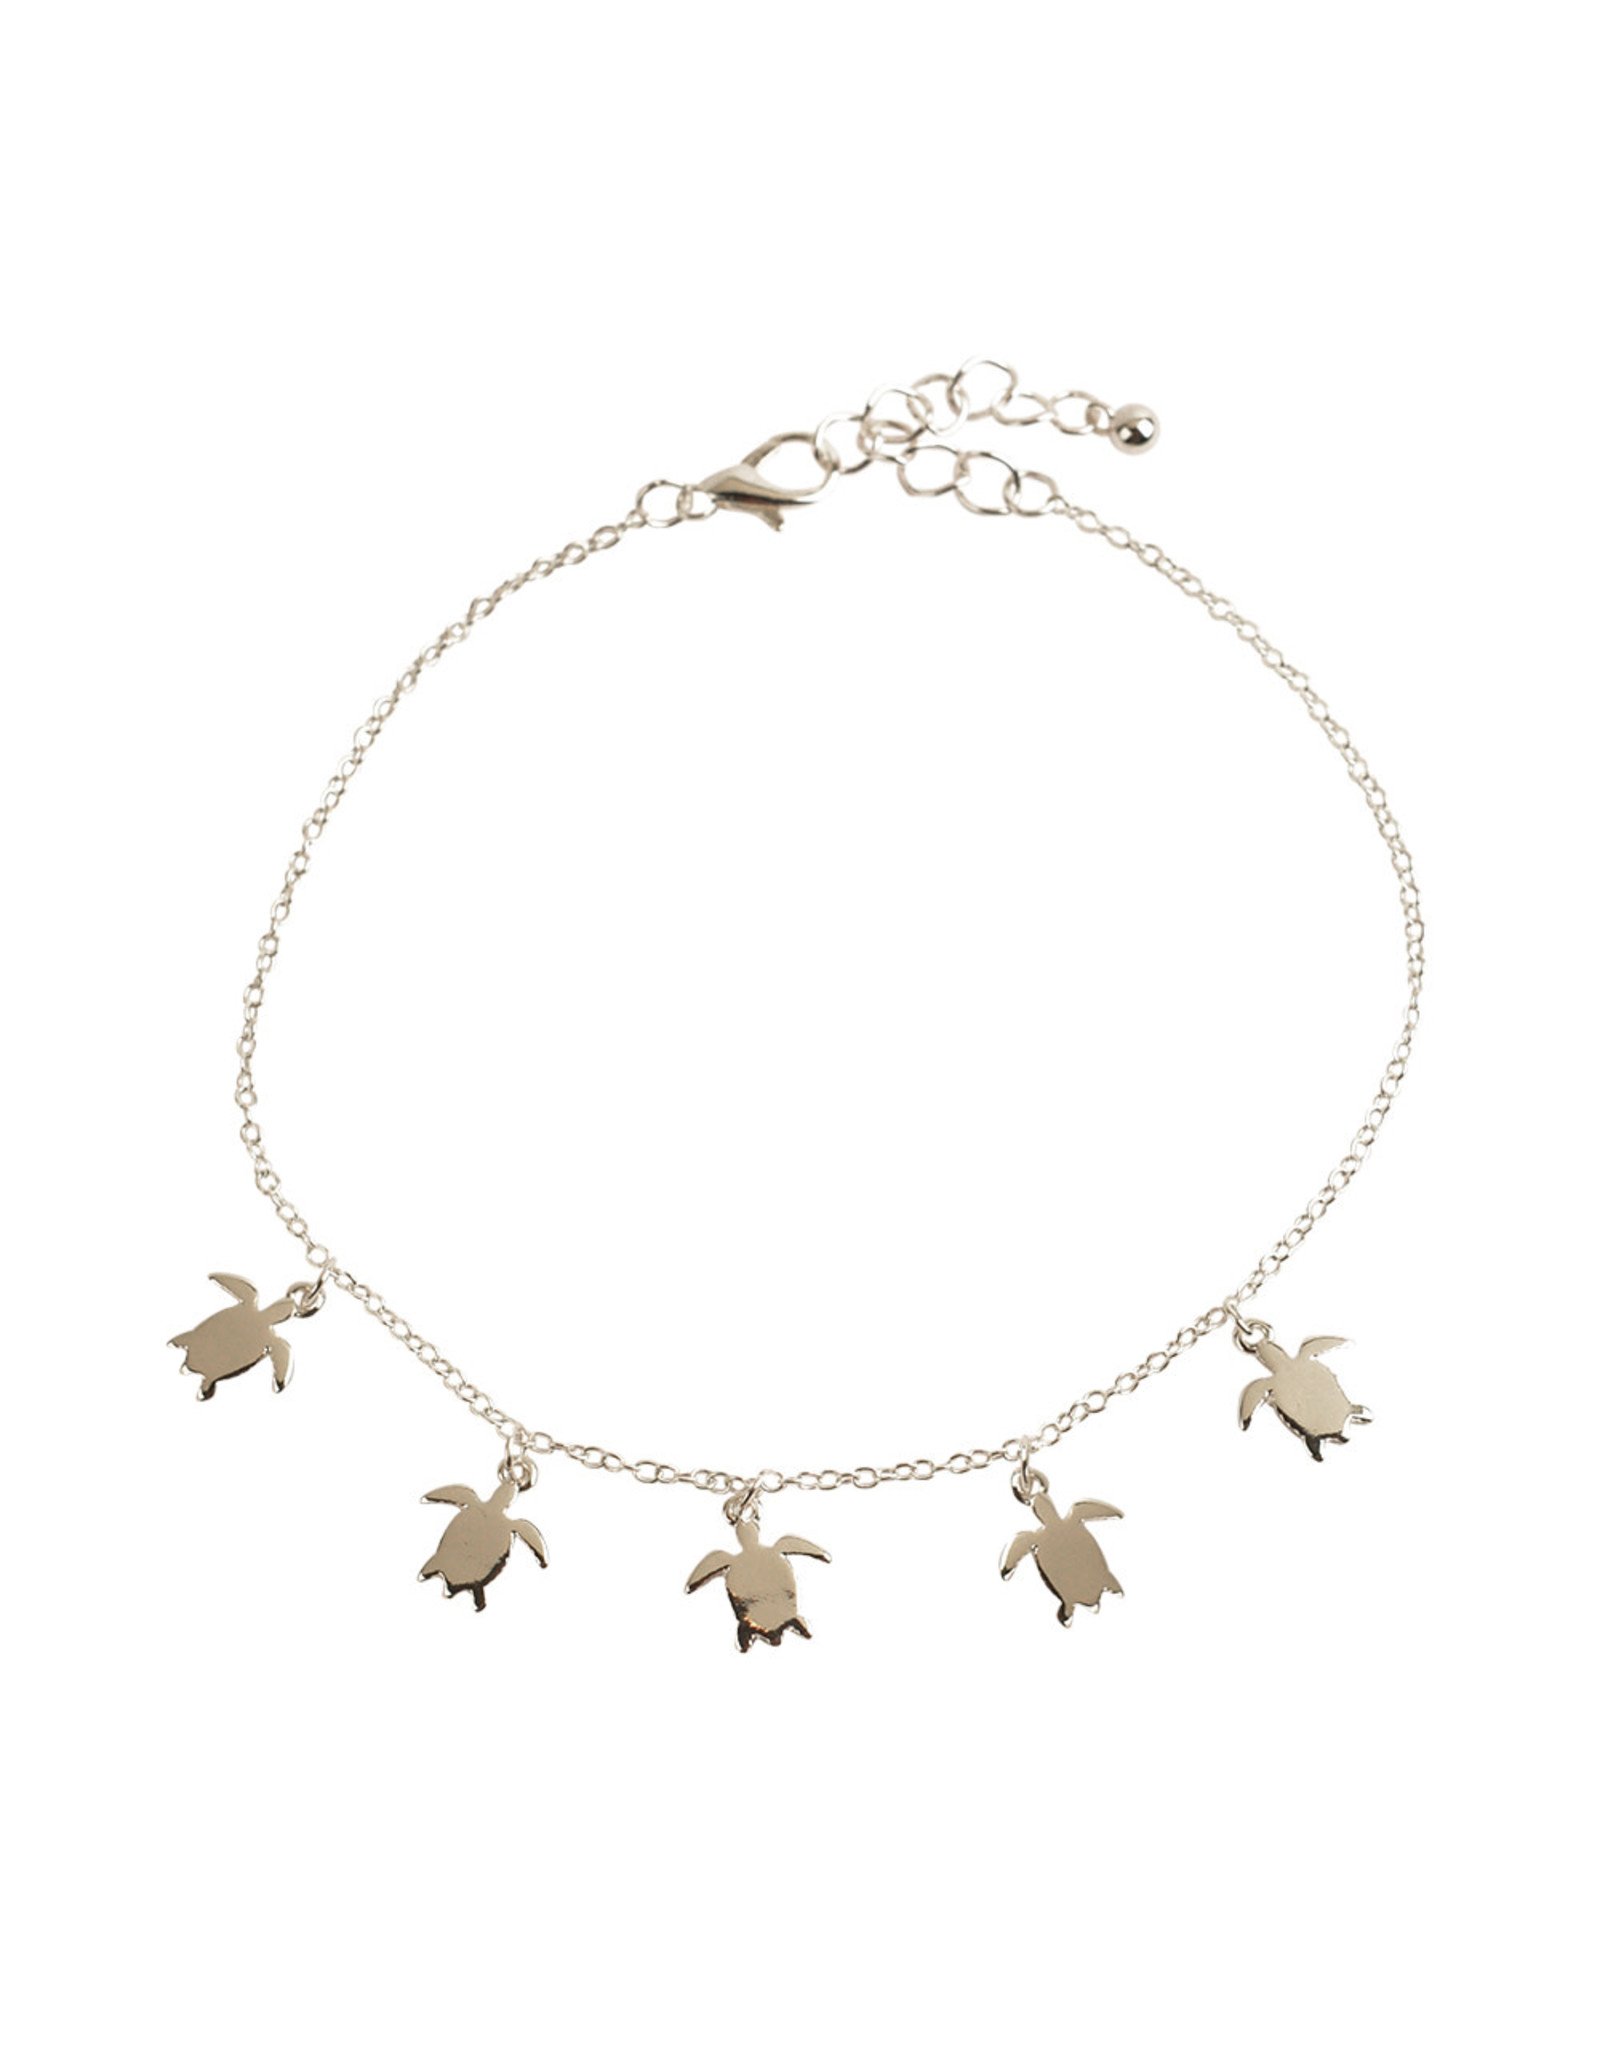 WORLD END IMPORTS CHARM CHAIN ANKLET SEA TURTLE ADJUSTABLE